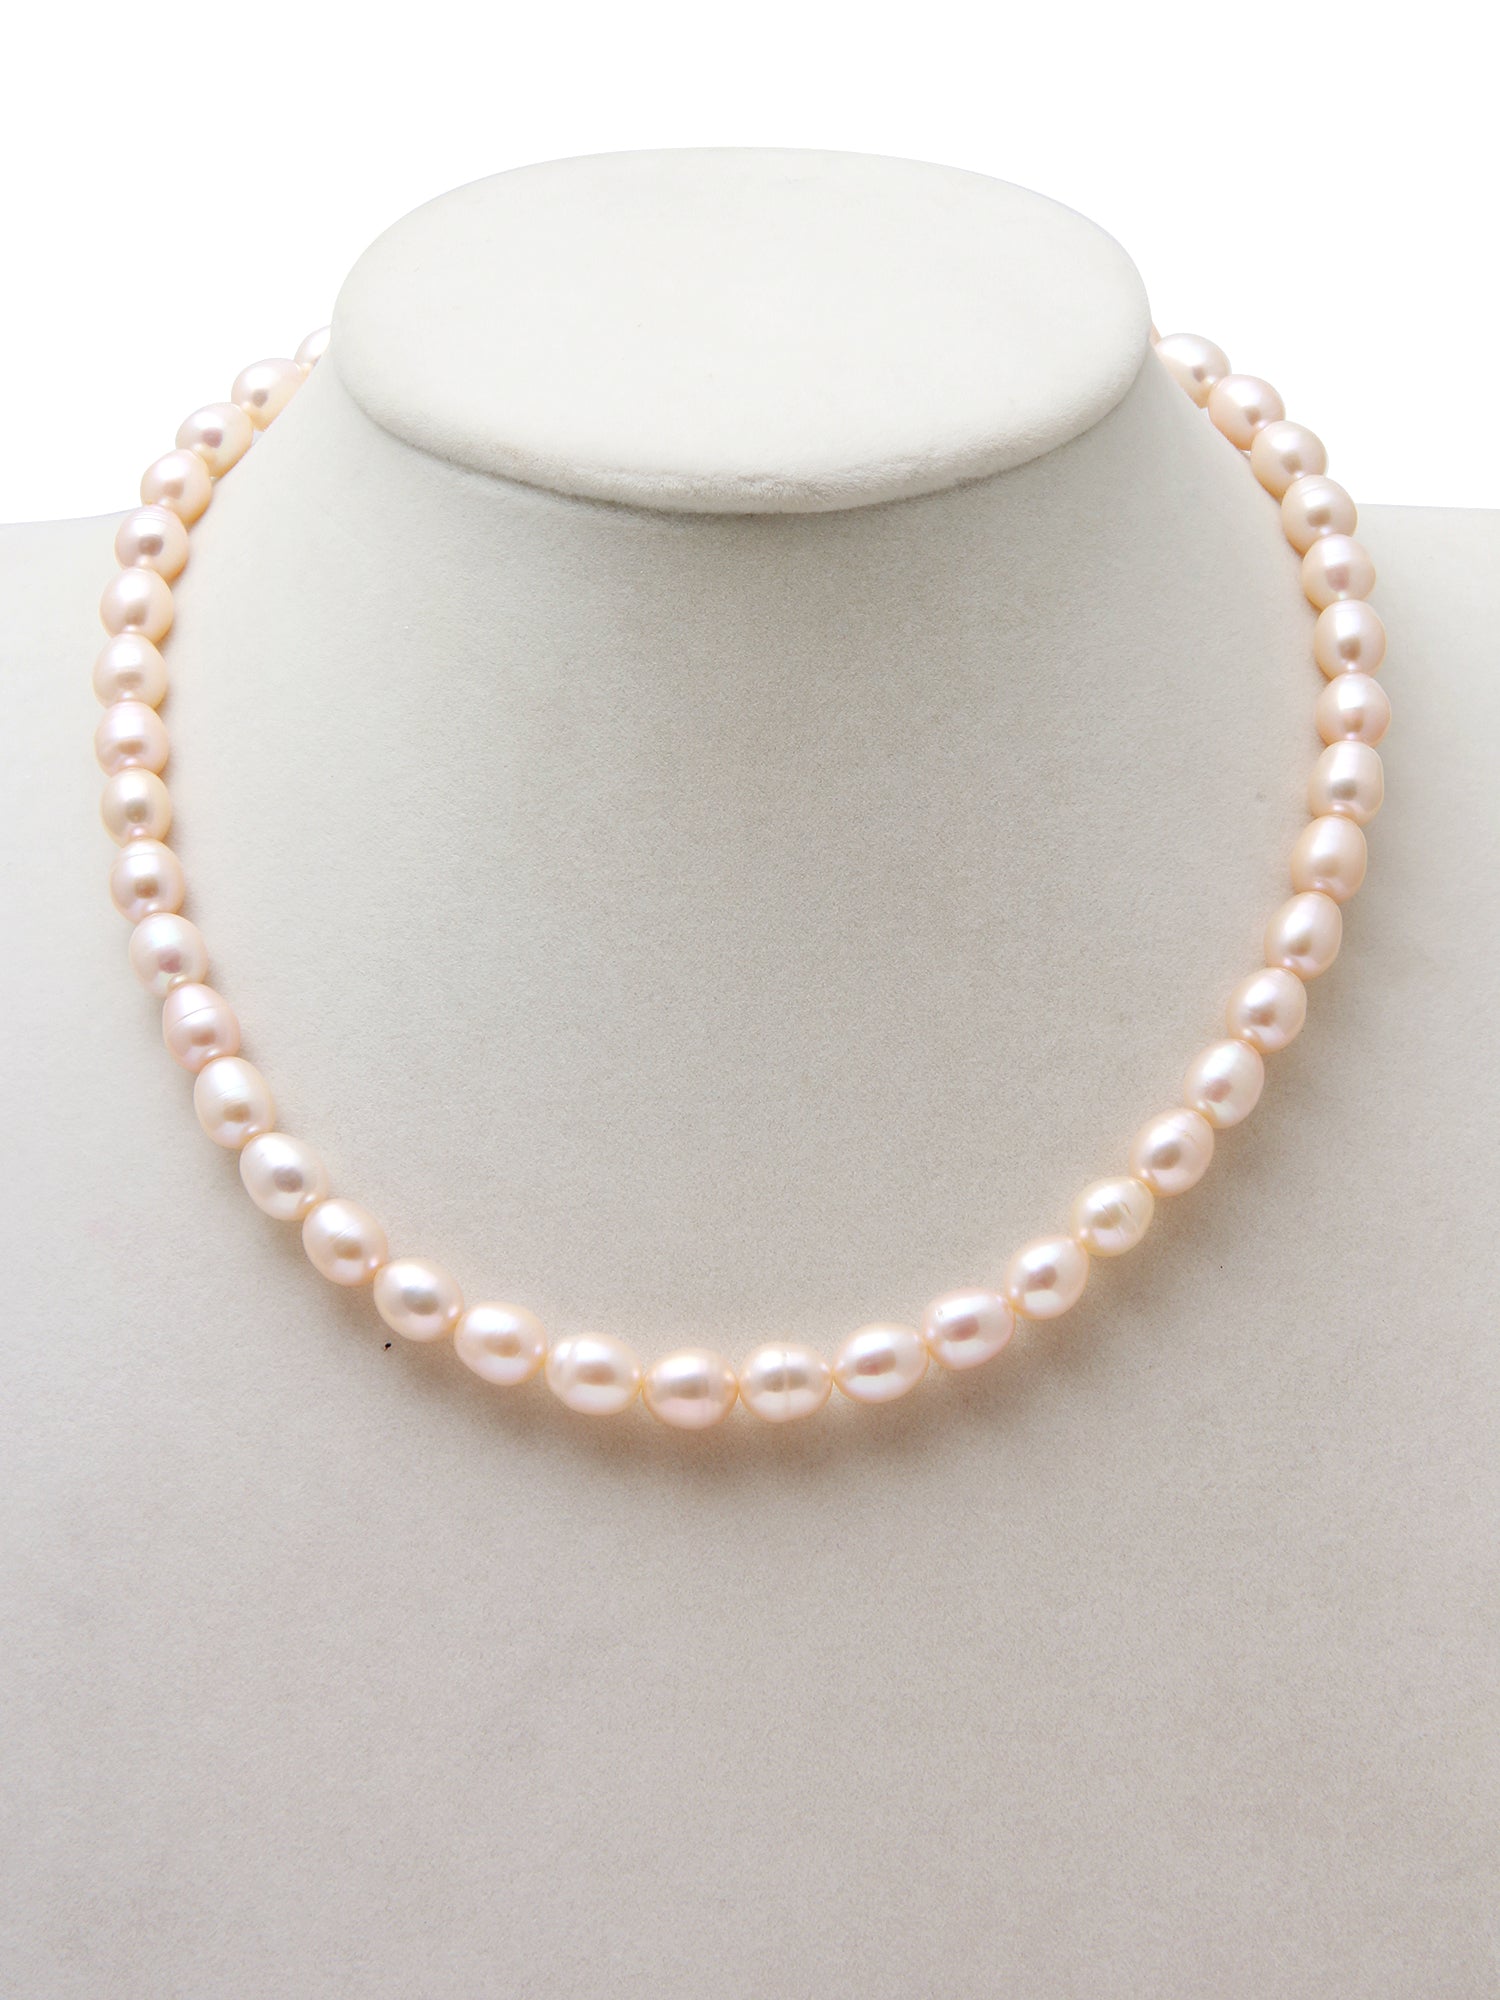 Oval (8mm by 10mm) Pink Freshwater Pearl Necklace, 200 carats - (F1006)